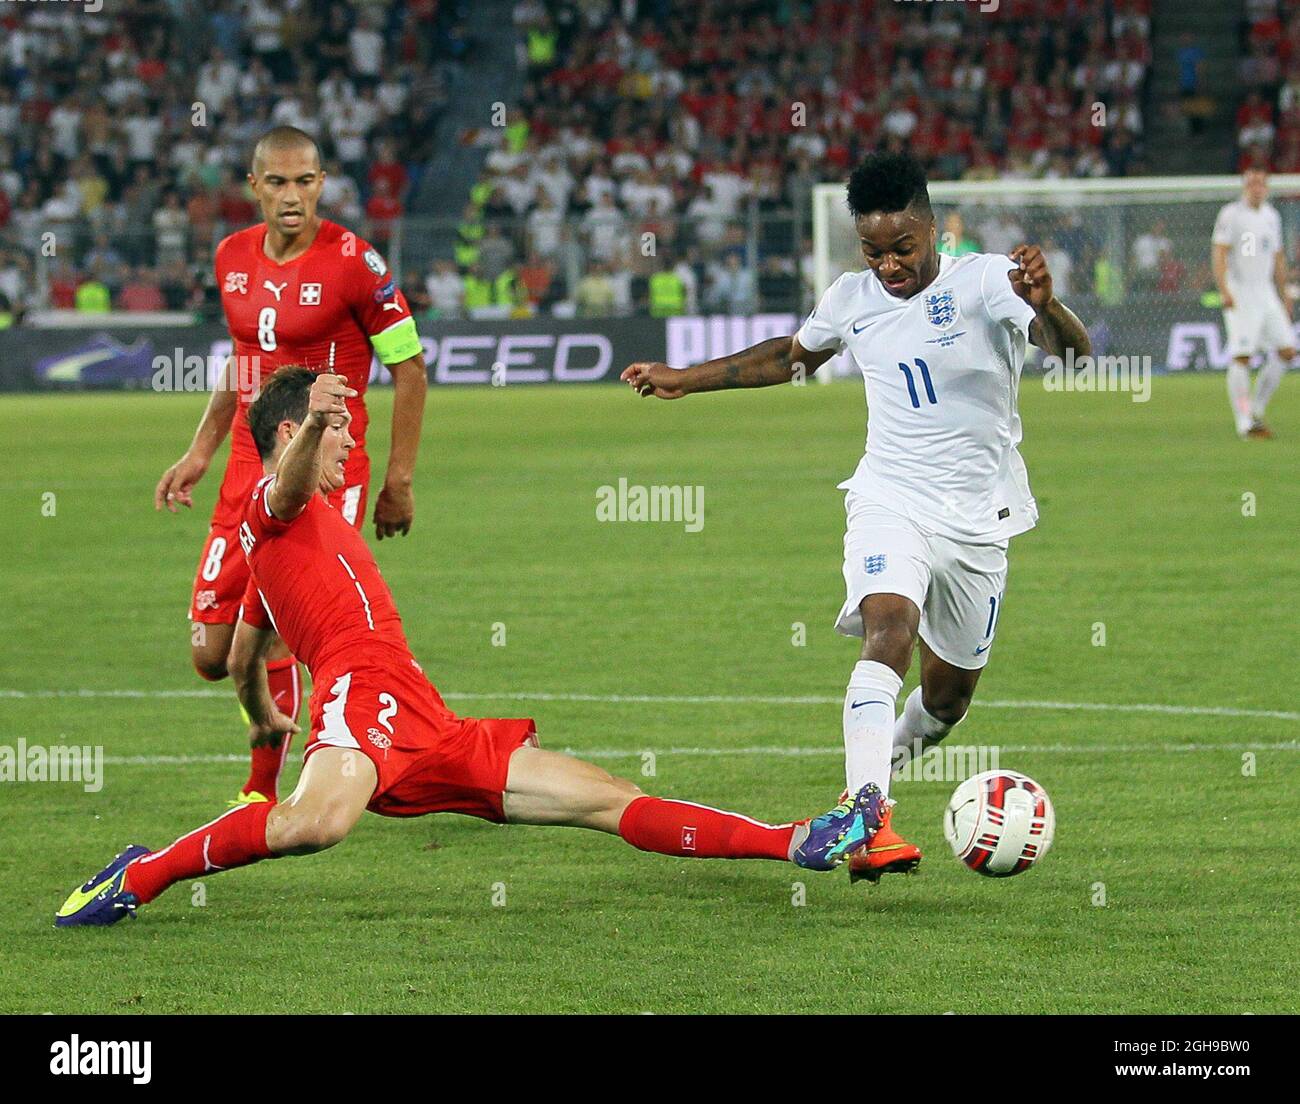 Switzerland's Johan Djourou tussles with England's Raheem Sterling during the UEFA Euro 2016 Qualifying Group E match between Switzerland and England held at the St Jakob Park in Switzerland on September 8, 2014.Picture David Klein/Sportimage. Stock Photo